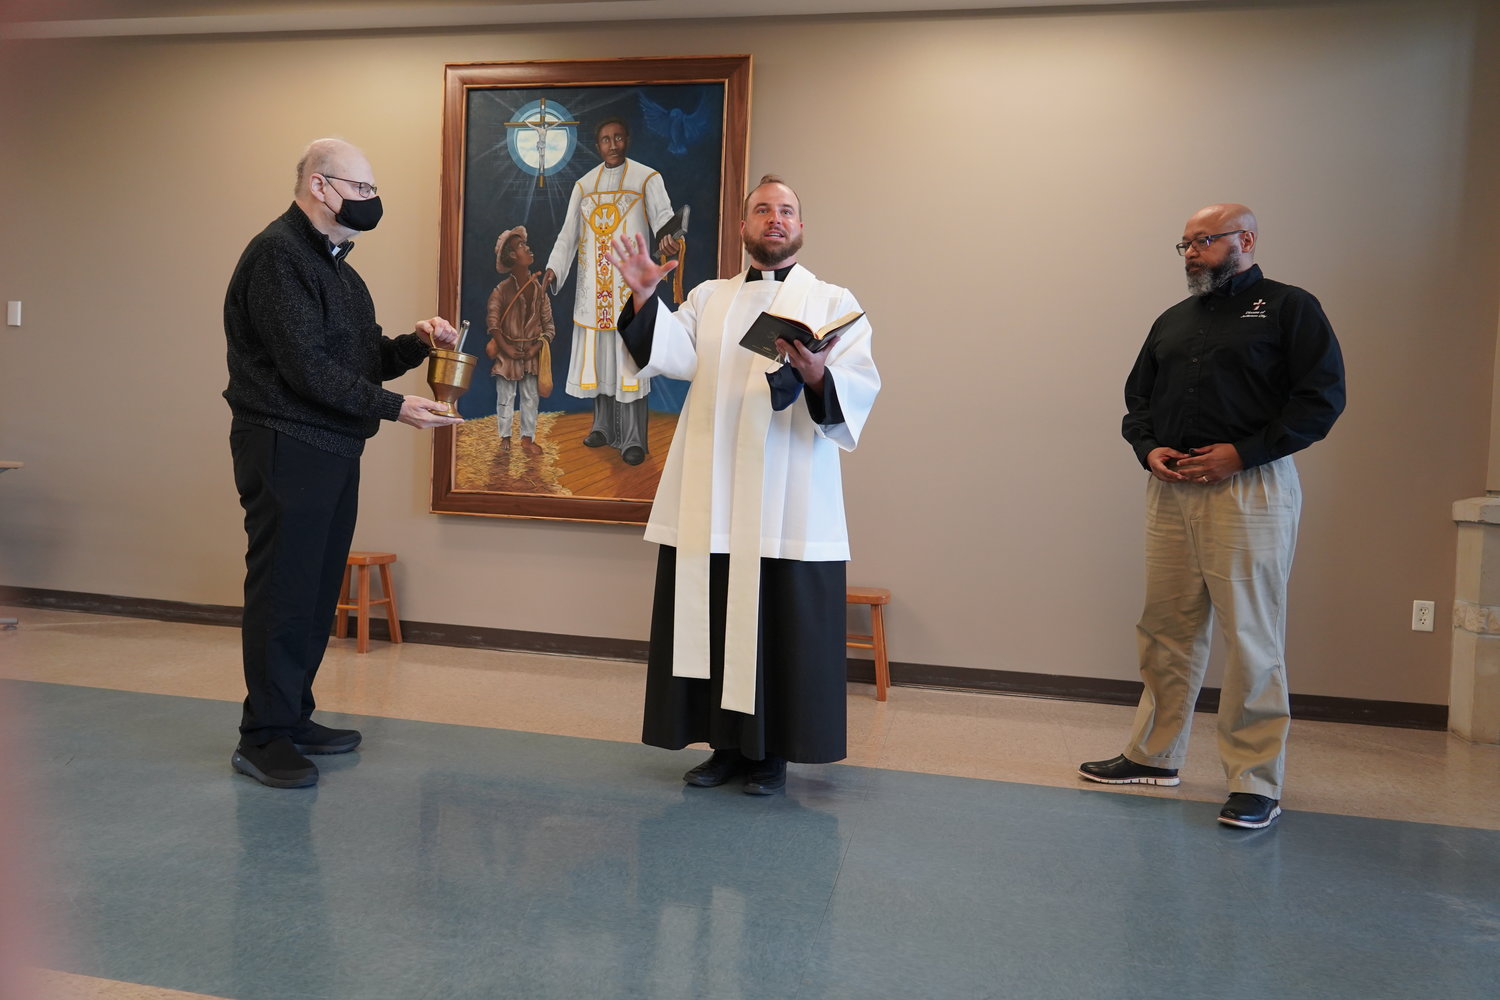 Father Michael Coleman, Father Paul Clark and Deacon William Seibert take part in the blessing and dedication of the new image of Venerable Father Augusus Tolton, titled “The Light that Guides the Faithful,” on May 14 at Fr. Tolton Regional Catholic High School in Columbia.